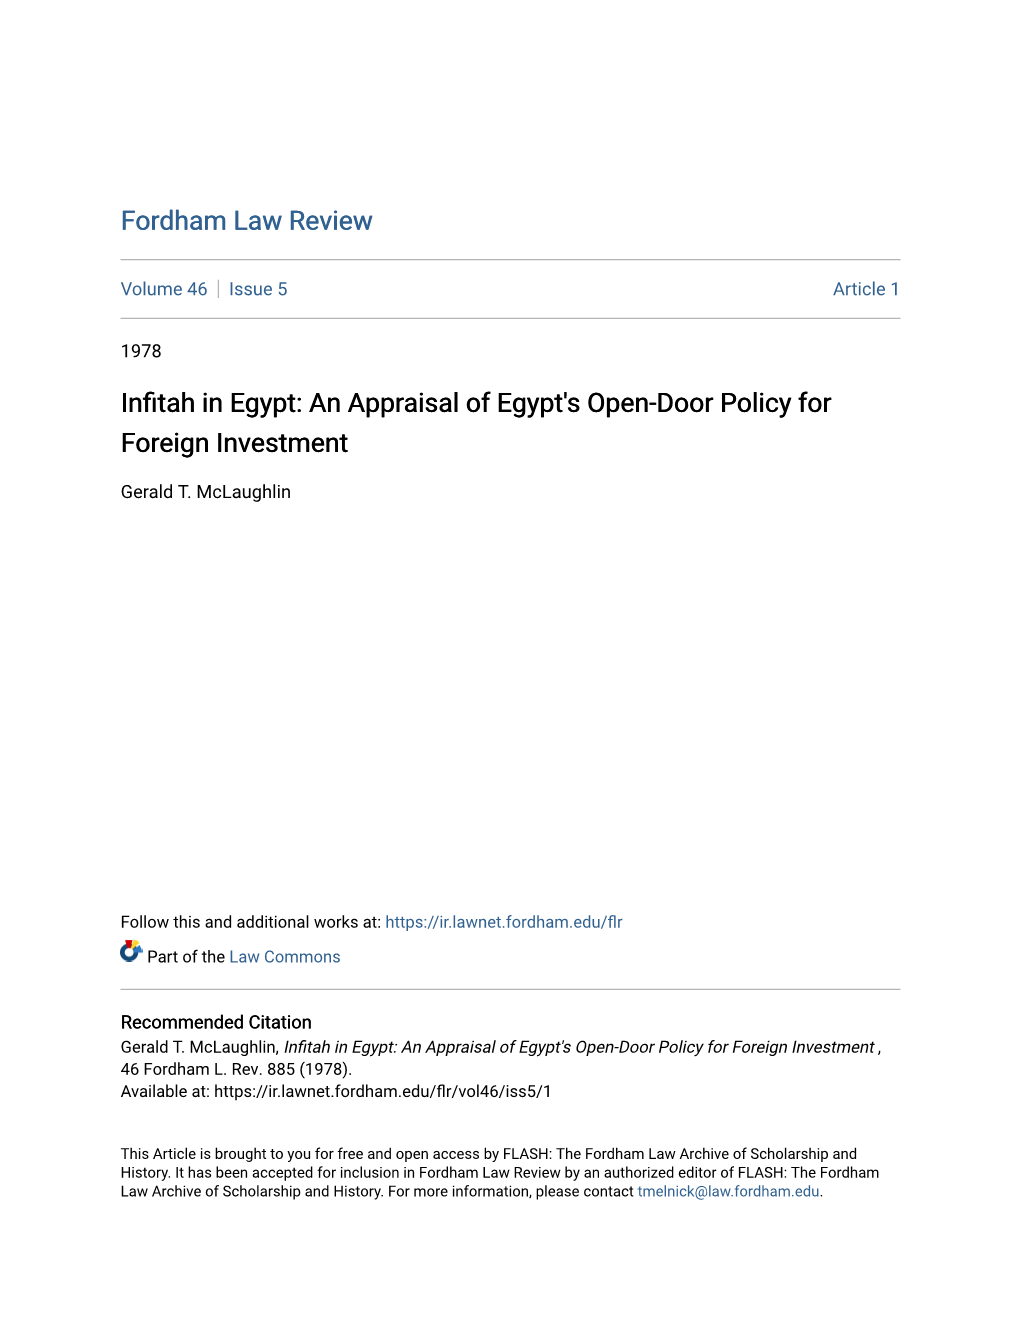 Infitah in Egypt: an Appraisal of Egypt's Open-Door Policy for Foreign Investment Gerald T